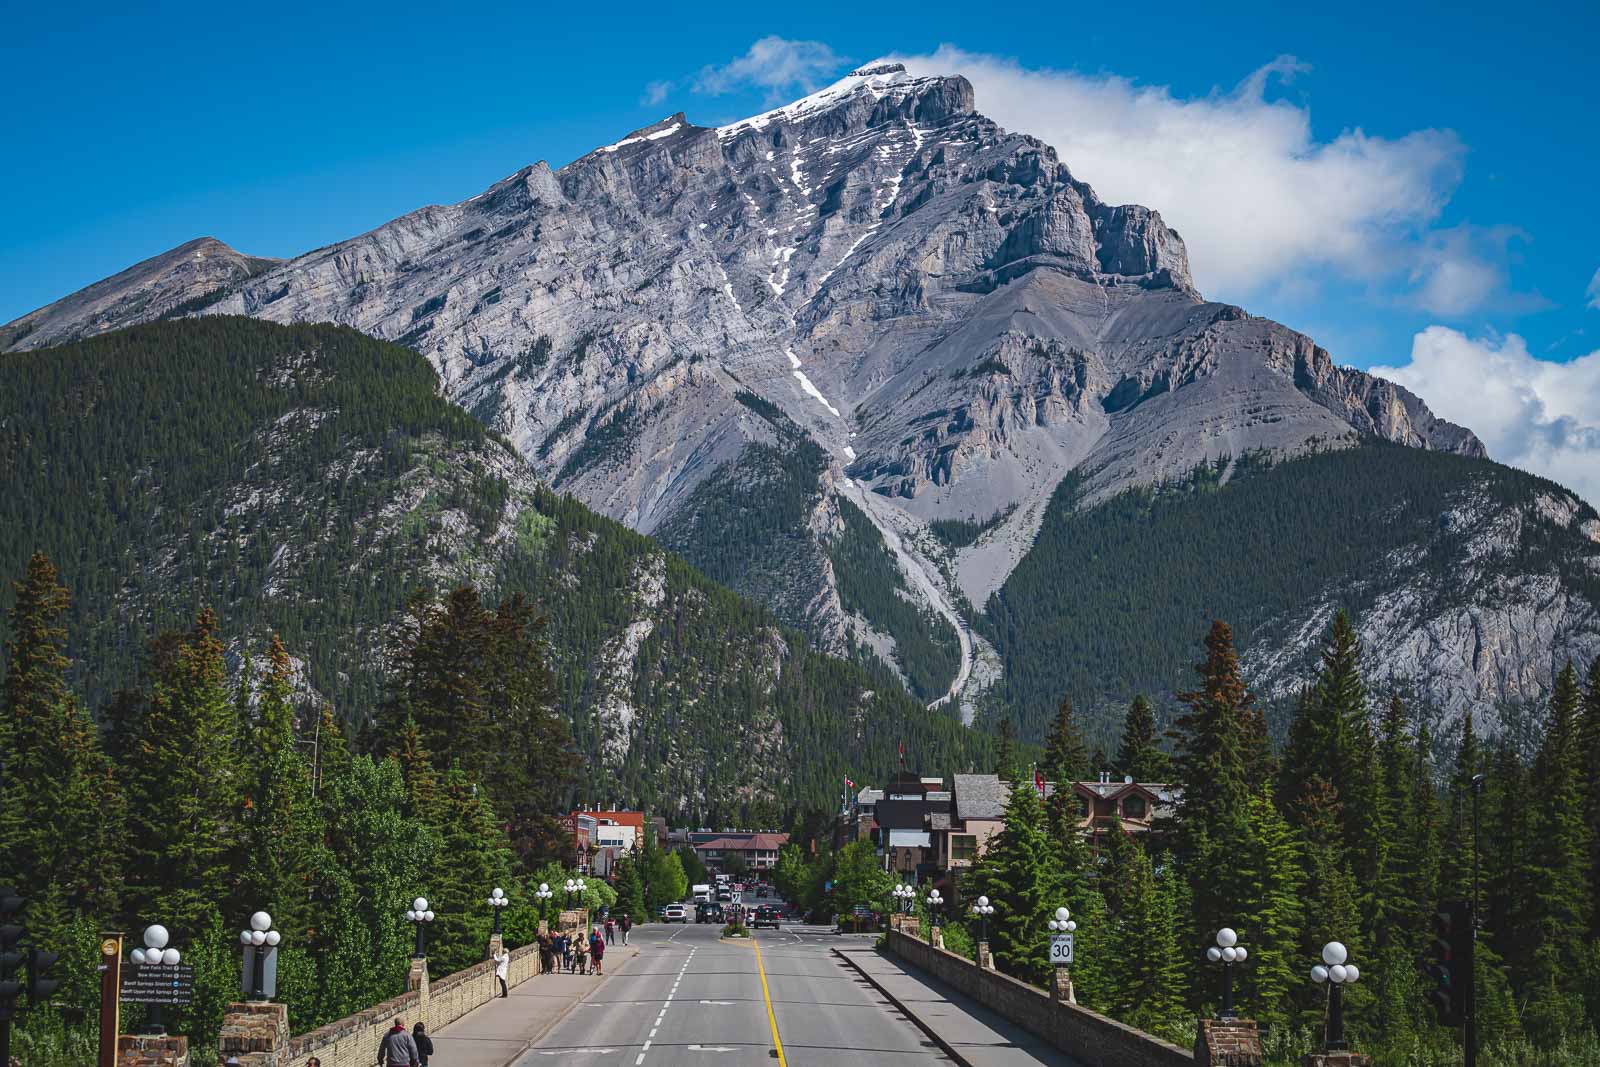 The picturesque town of Banff